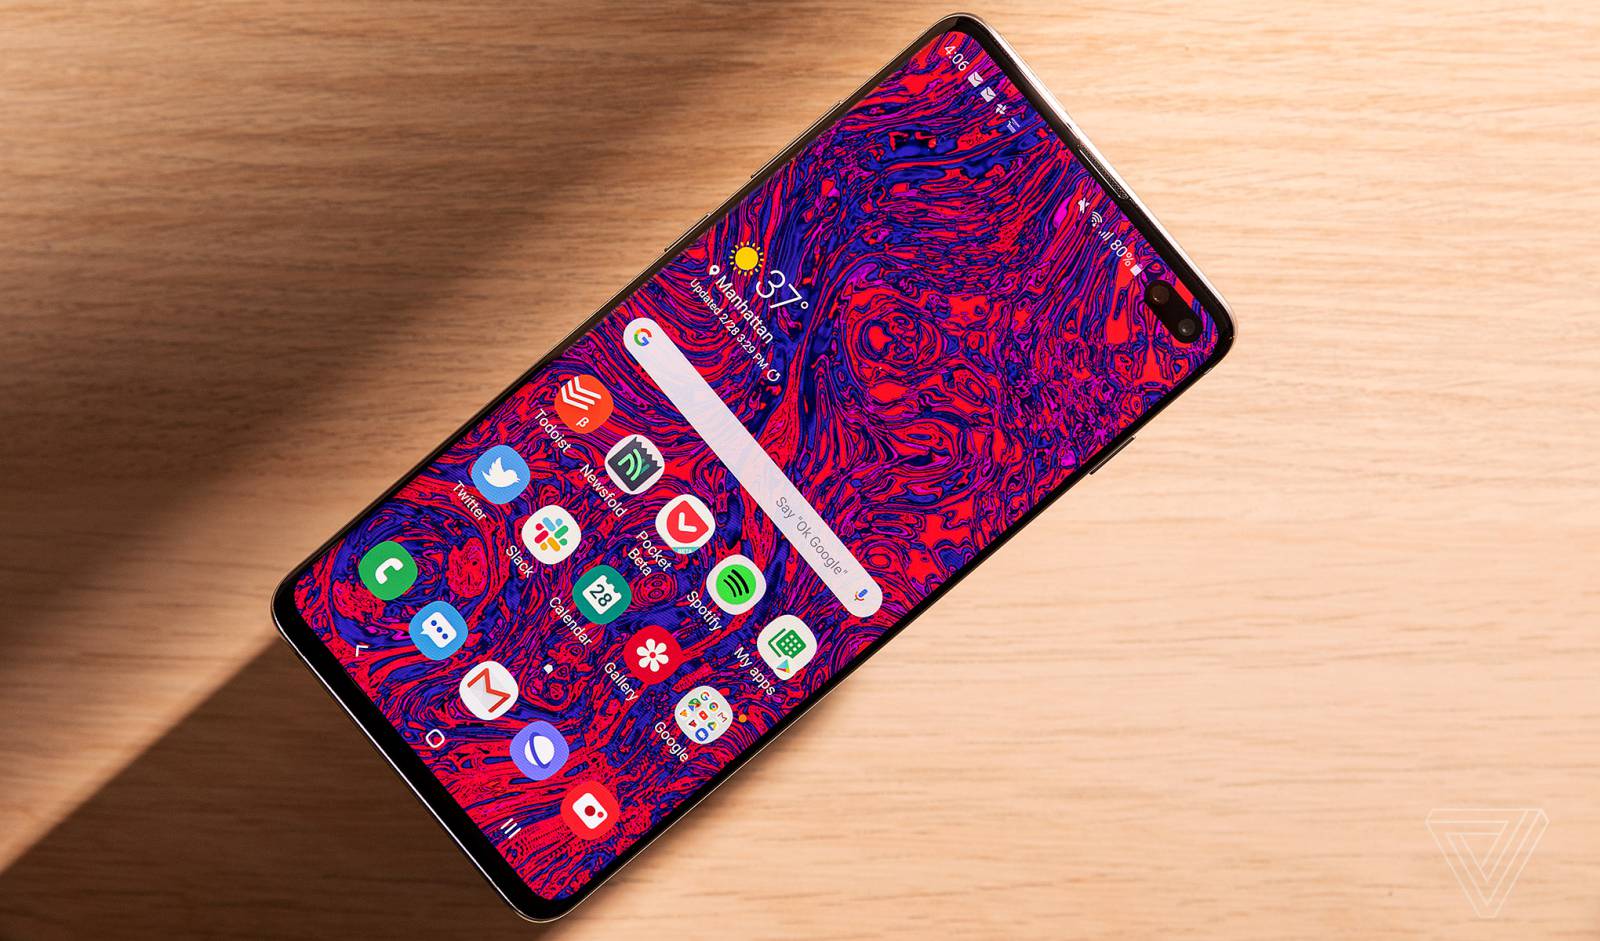 Remises eMAG galaxy s10